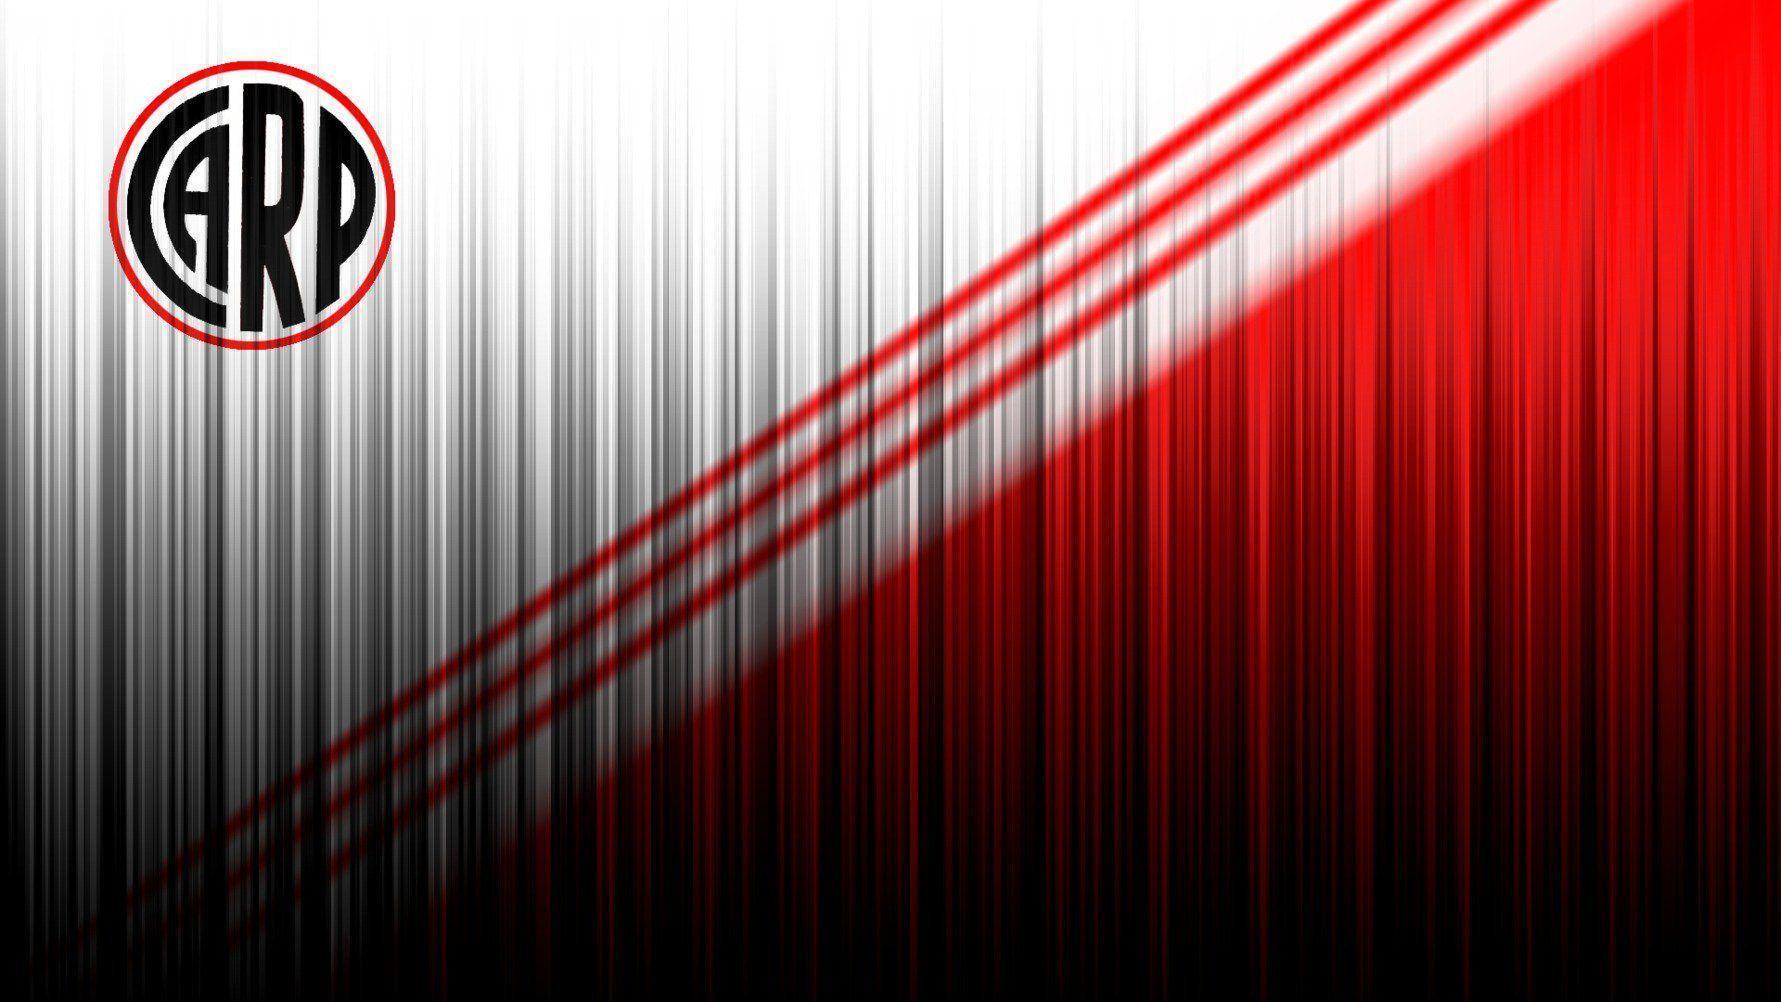 River plate HD wallpapers